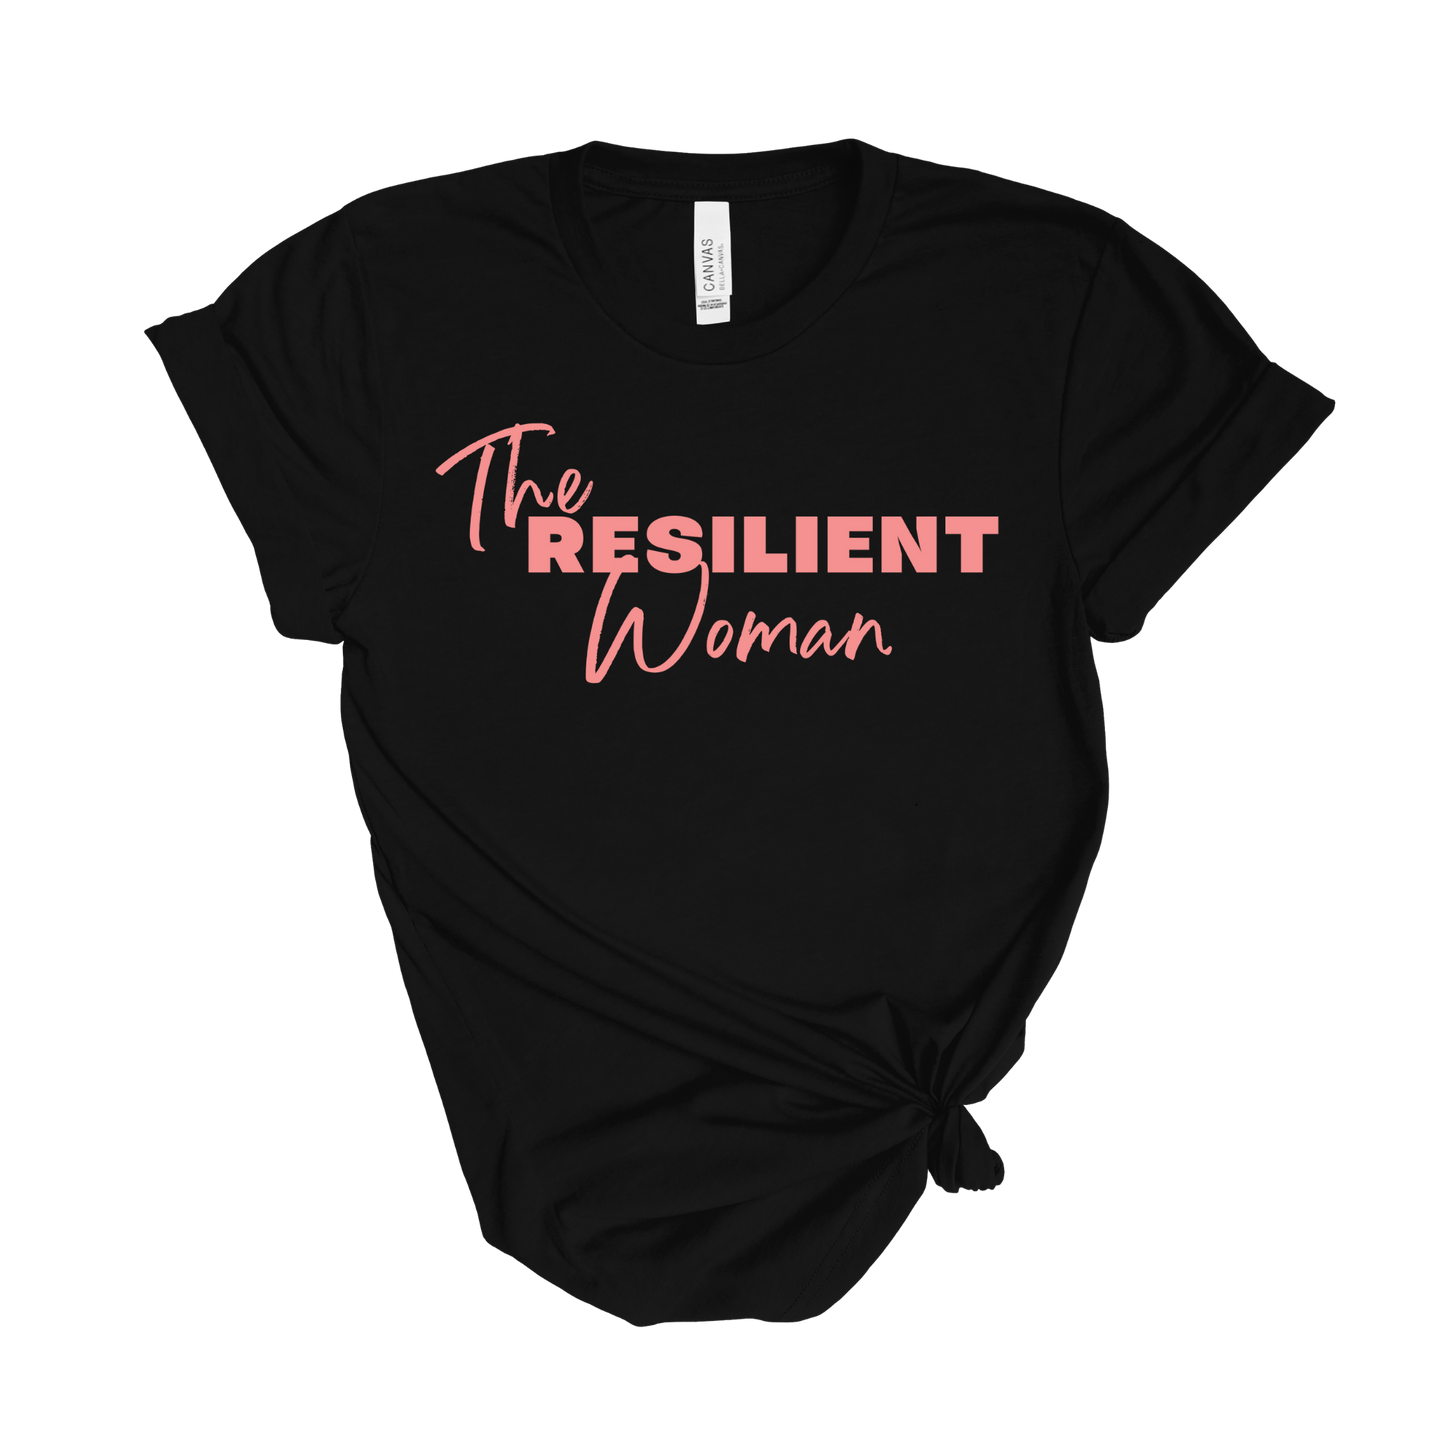 The Resilient Woman Tee